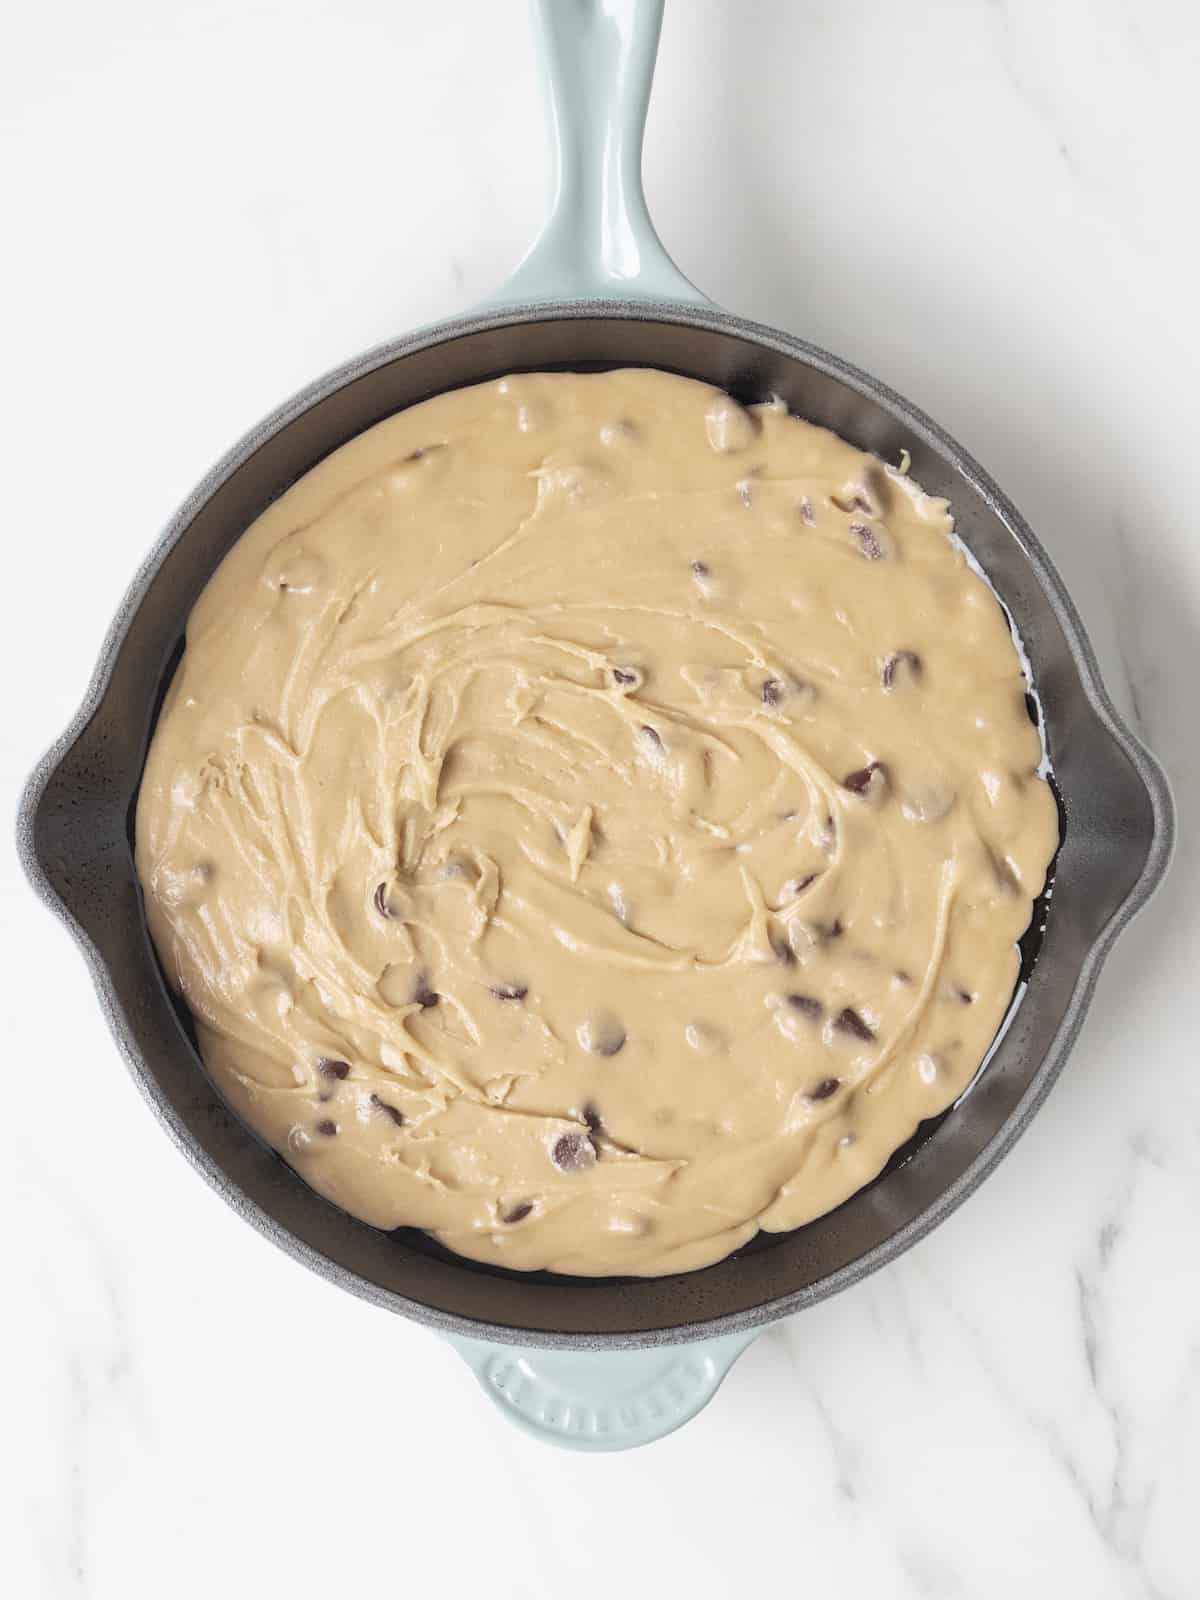 A skillet with a blue handle, with cookie dough spread out evenly in the skillet.